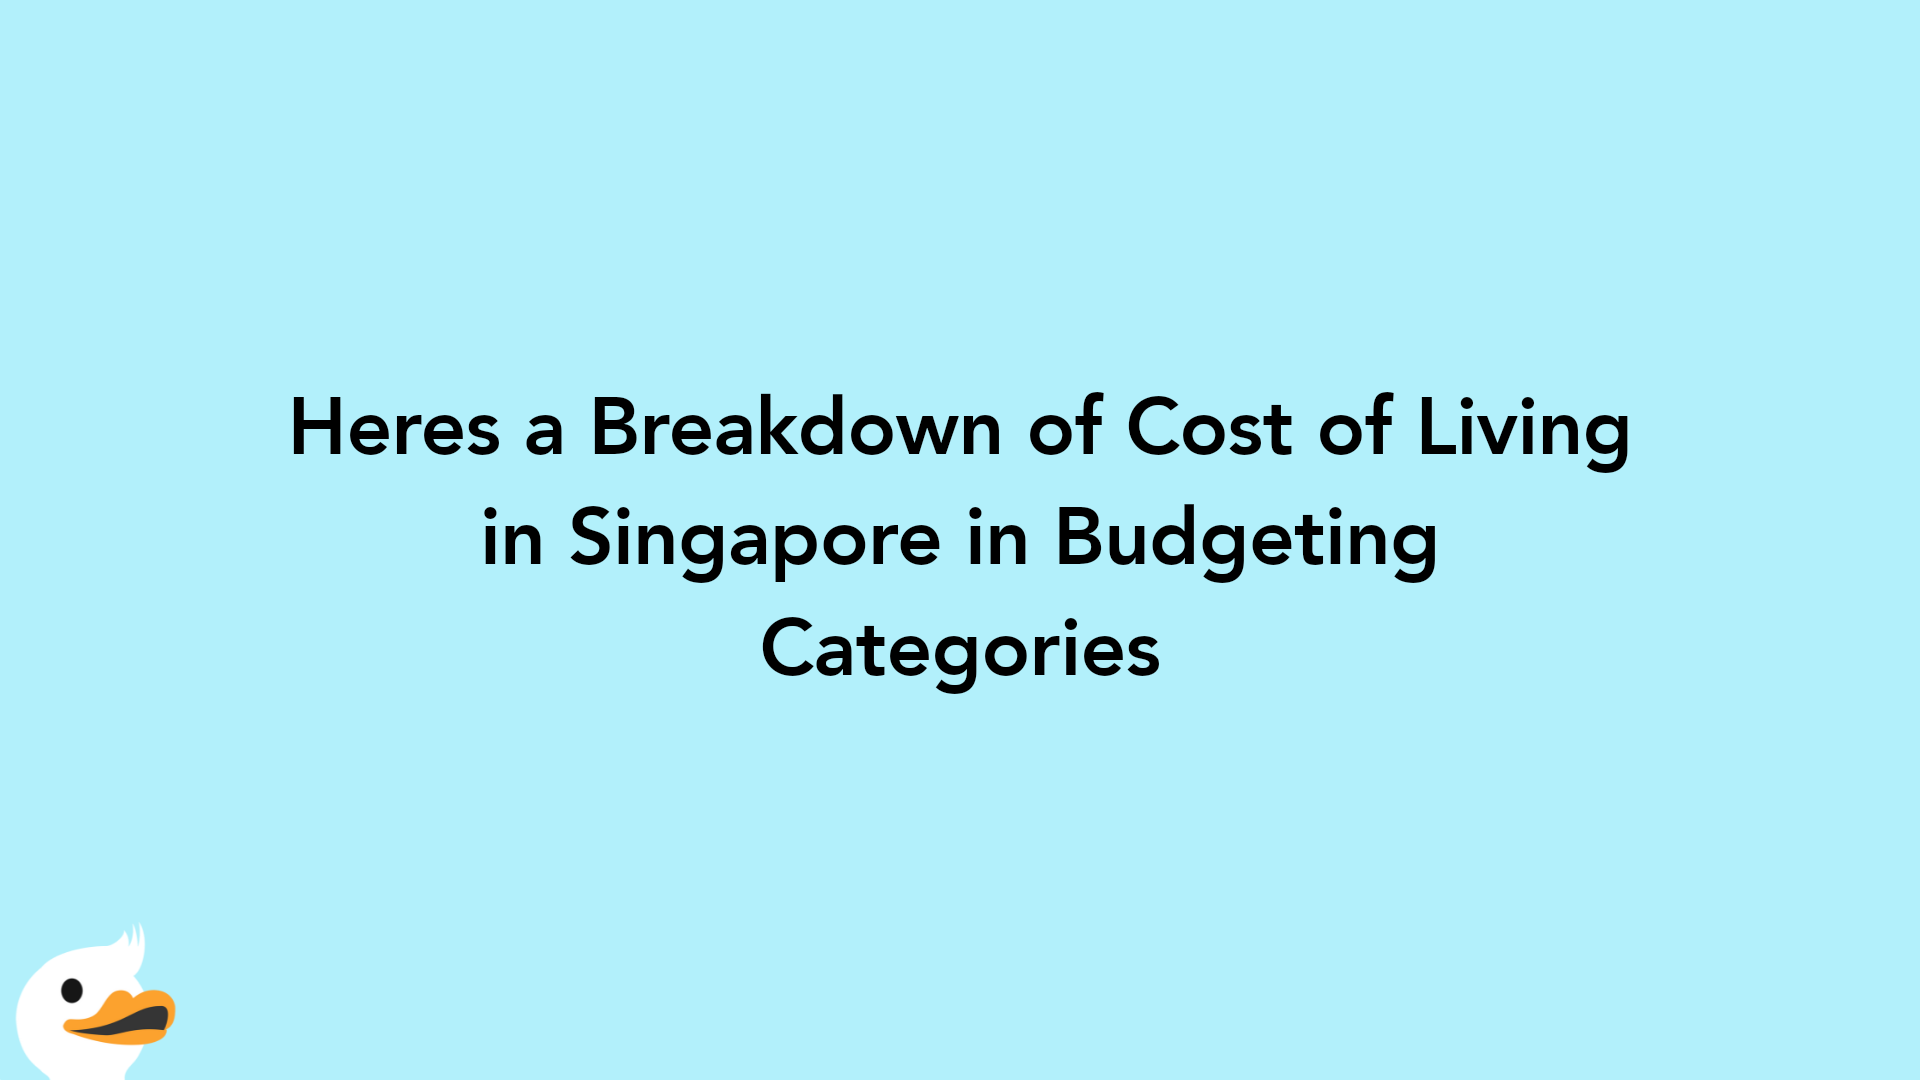 Heres a Breakdown of Cost of Living in Singapore in Budgeting Categories